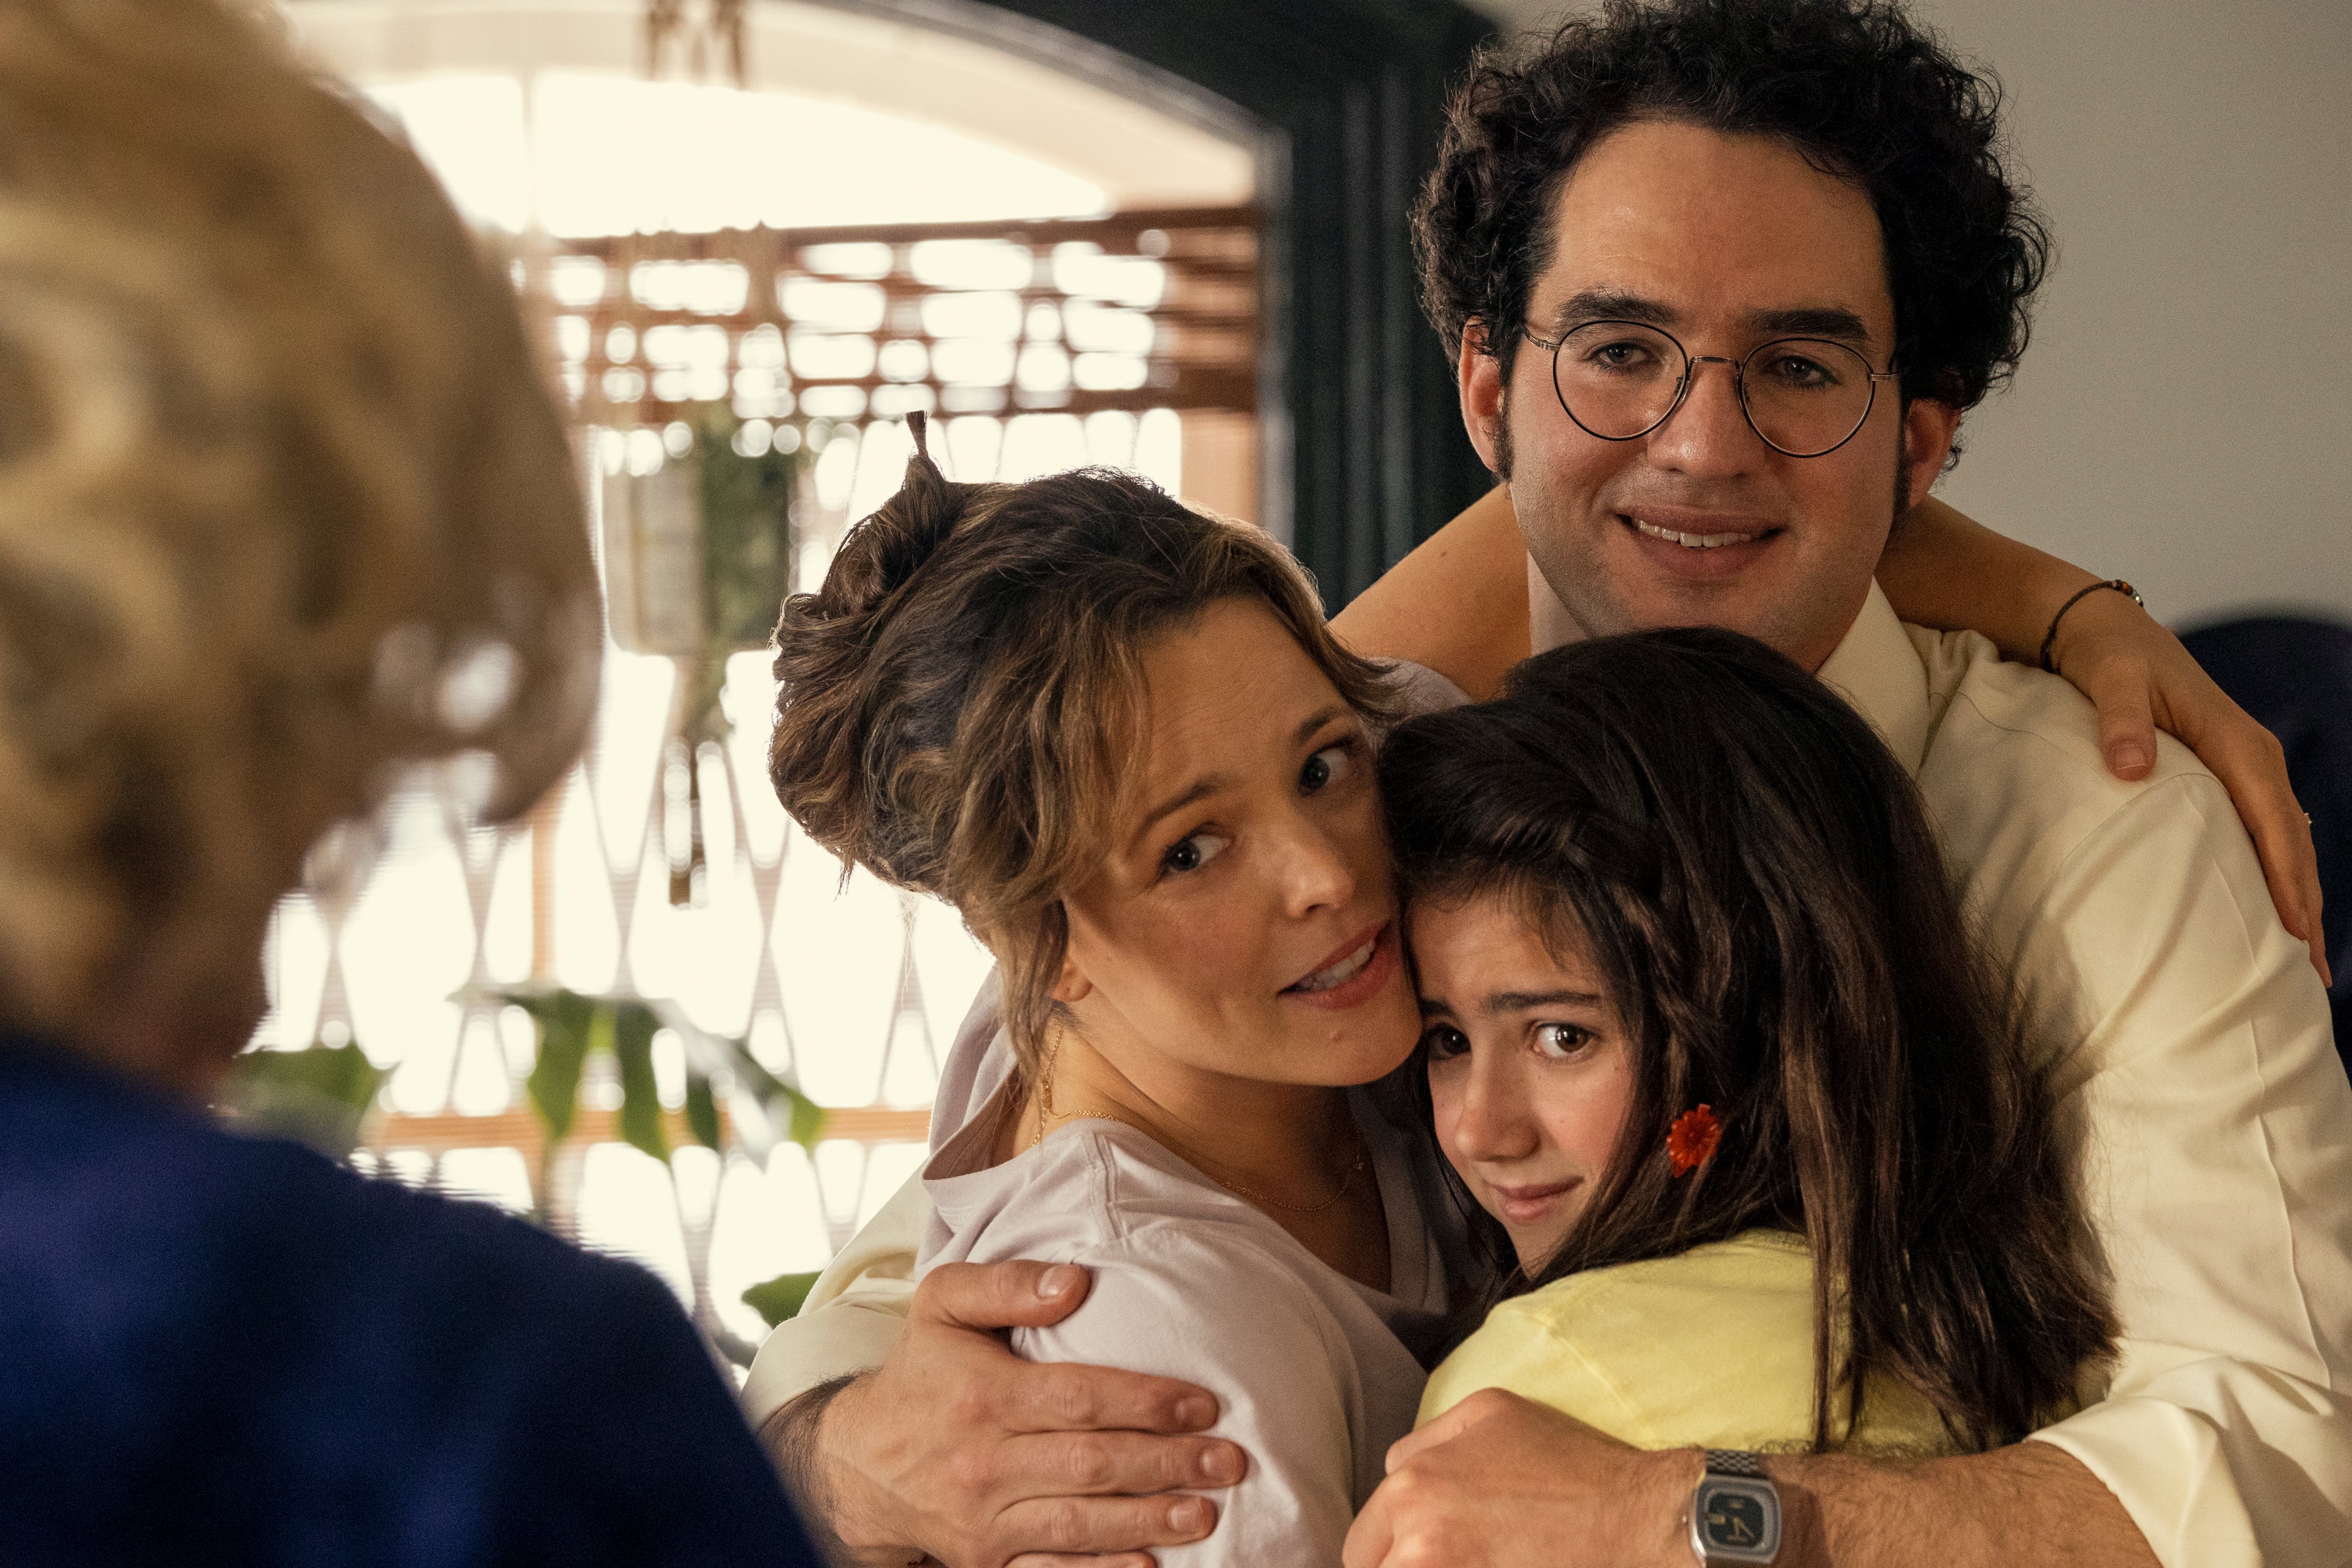 The three stand in a group hug, looking very ’70s, while staring at a gray-haired woman who's mostly off-screen. The parents smile, while the daughter looks perhaps a little suffocated.